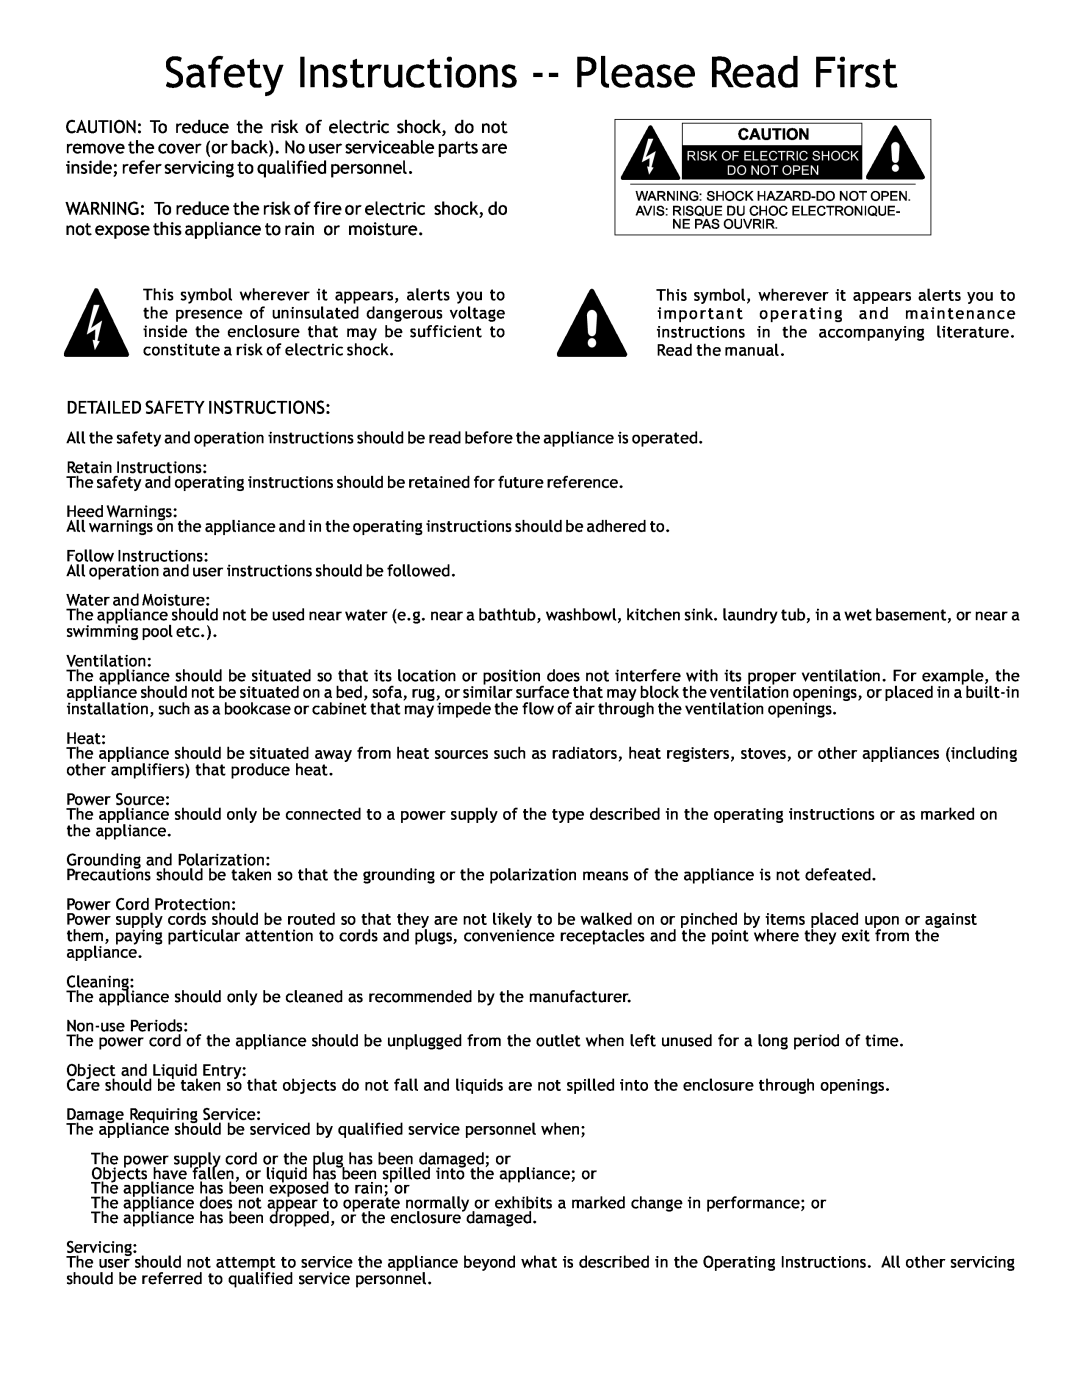 NHT M-20 owner manual Safety Instructions --Please Read First 